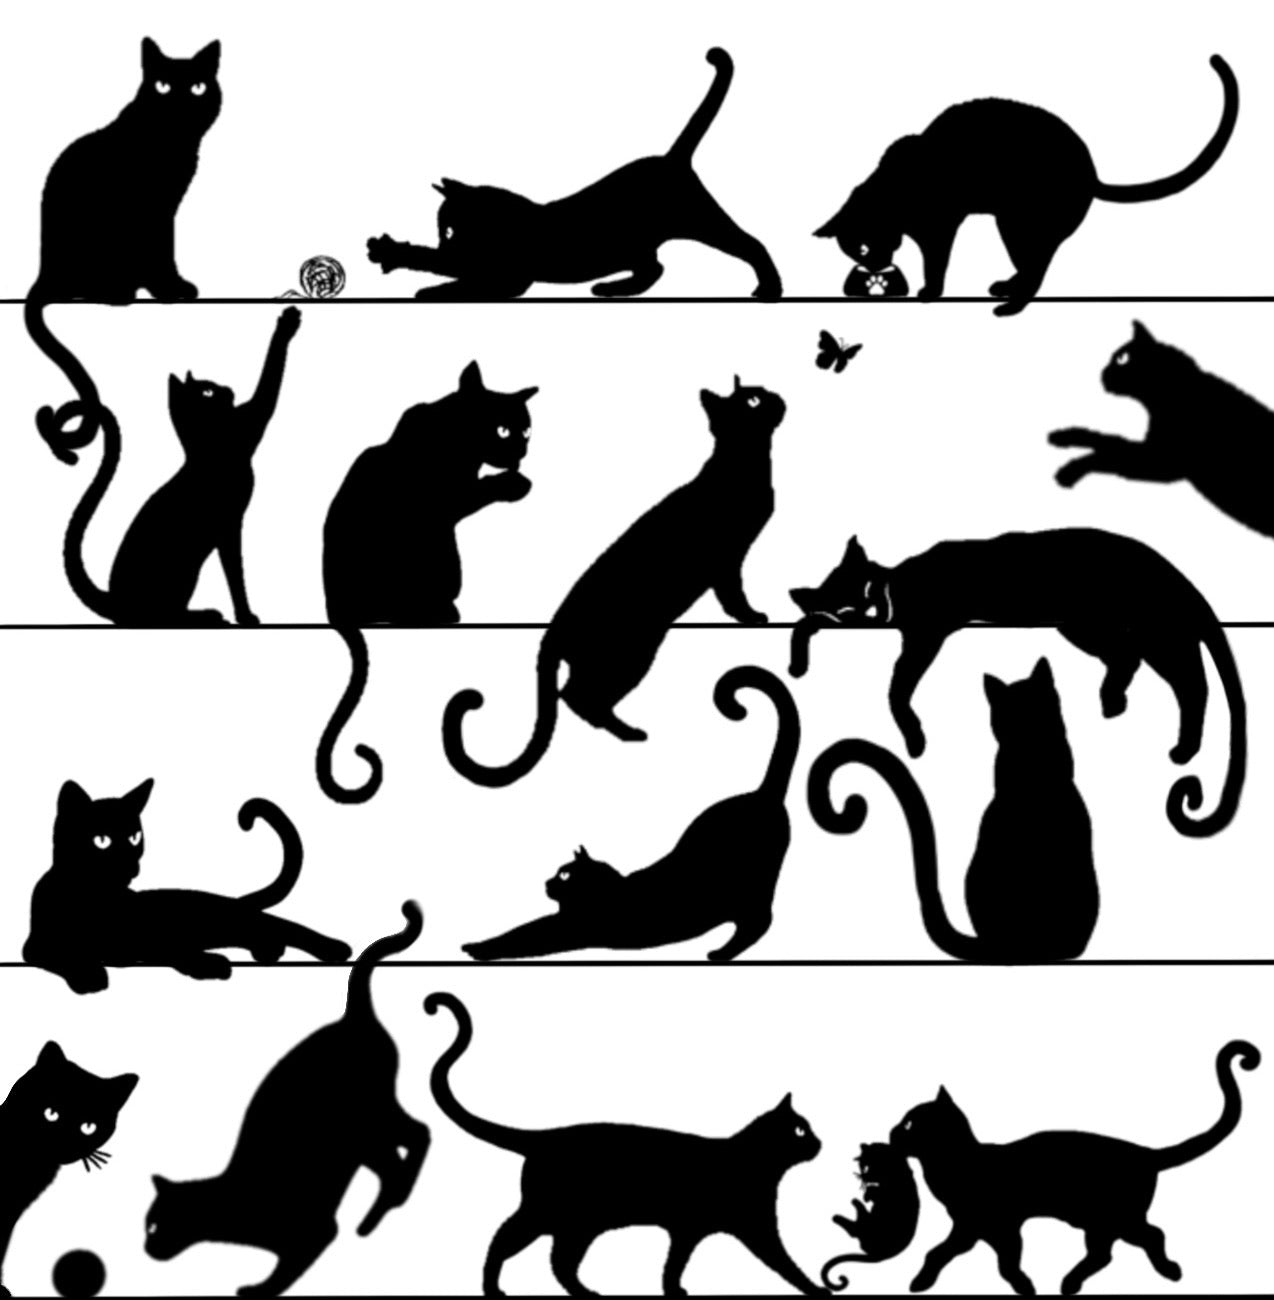 Playful Cats Silhouette Collection Art Square Personalised Coaster Gift Idea